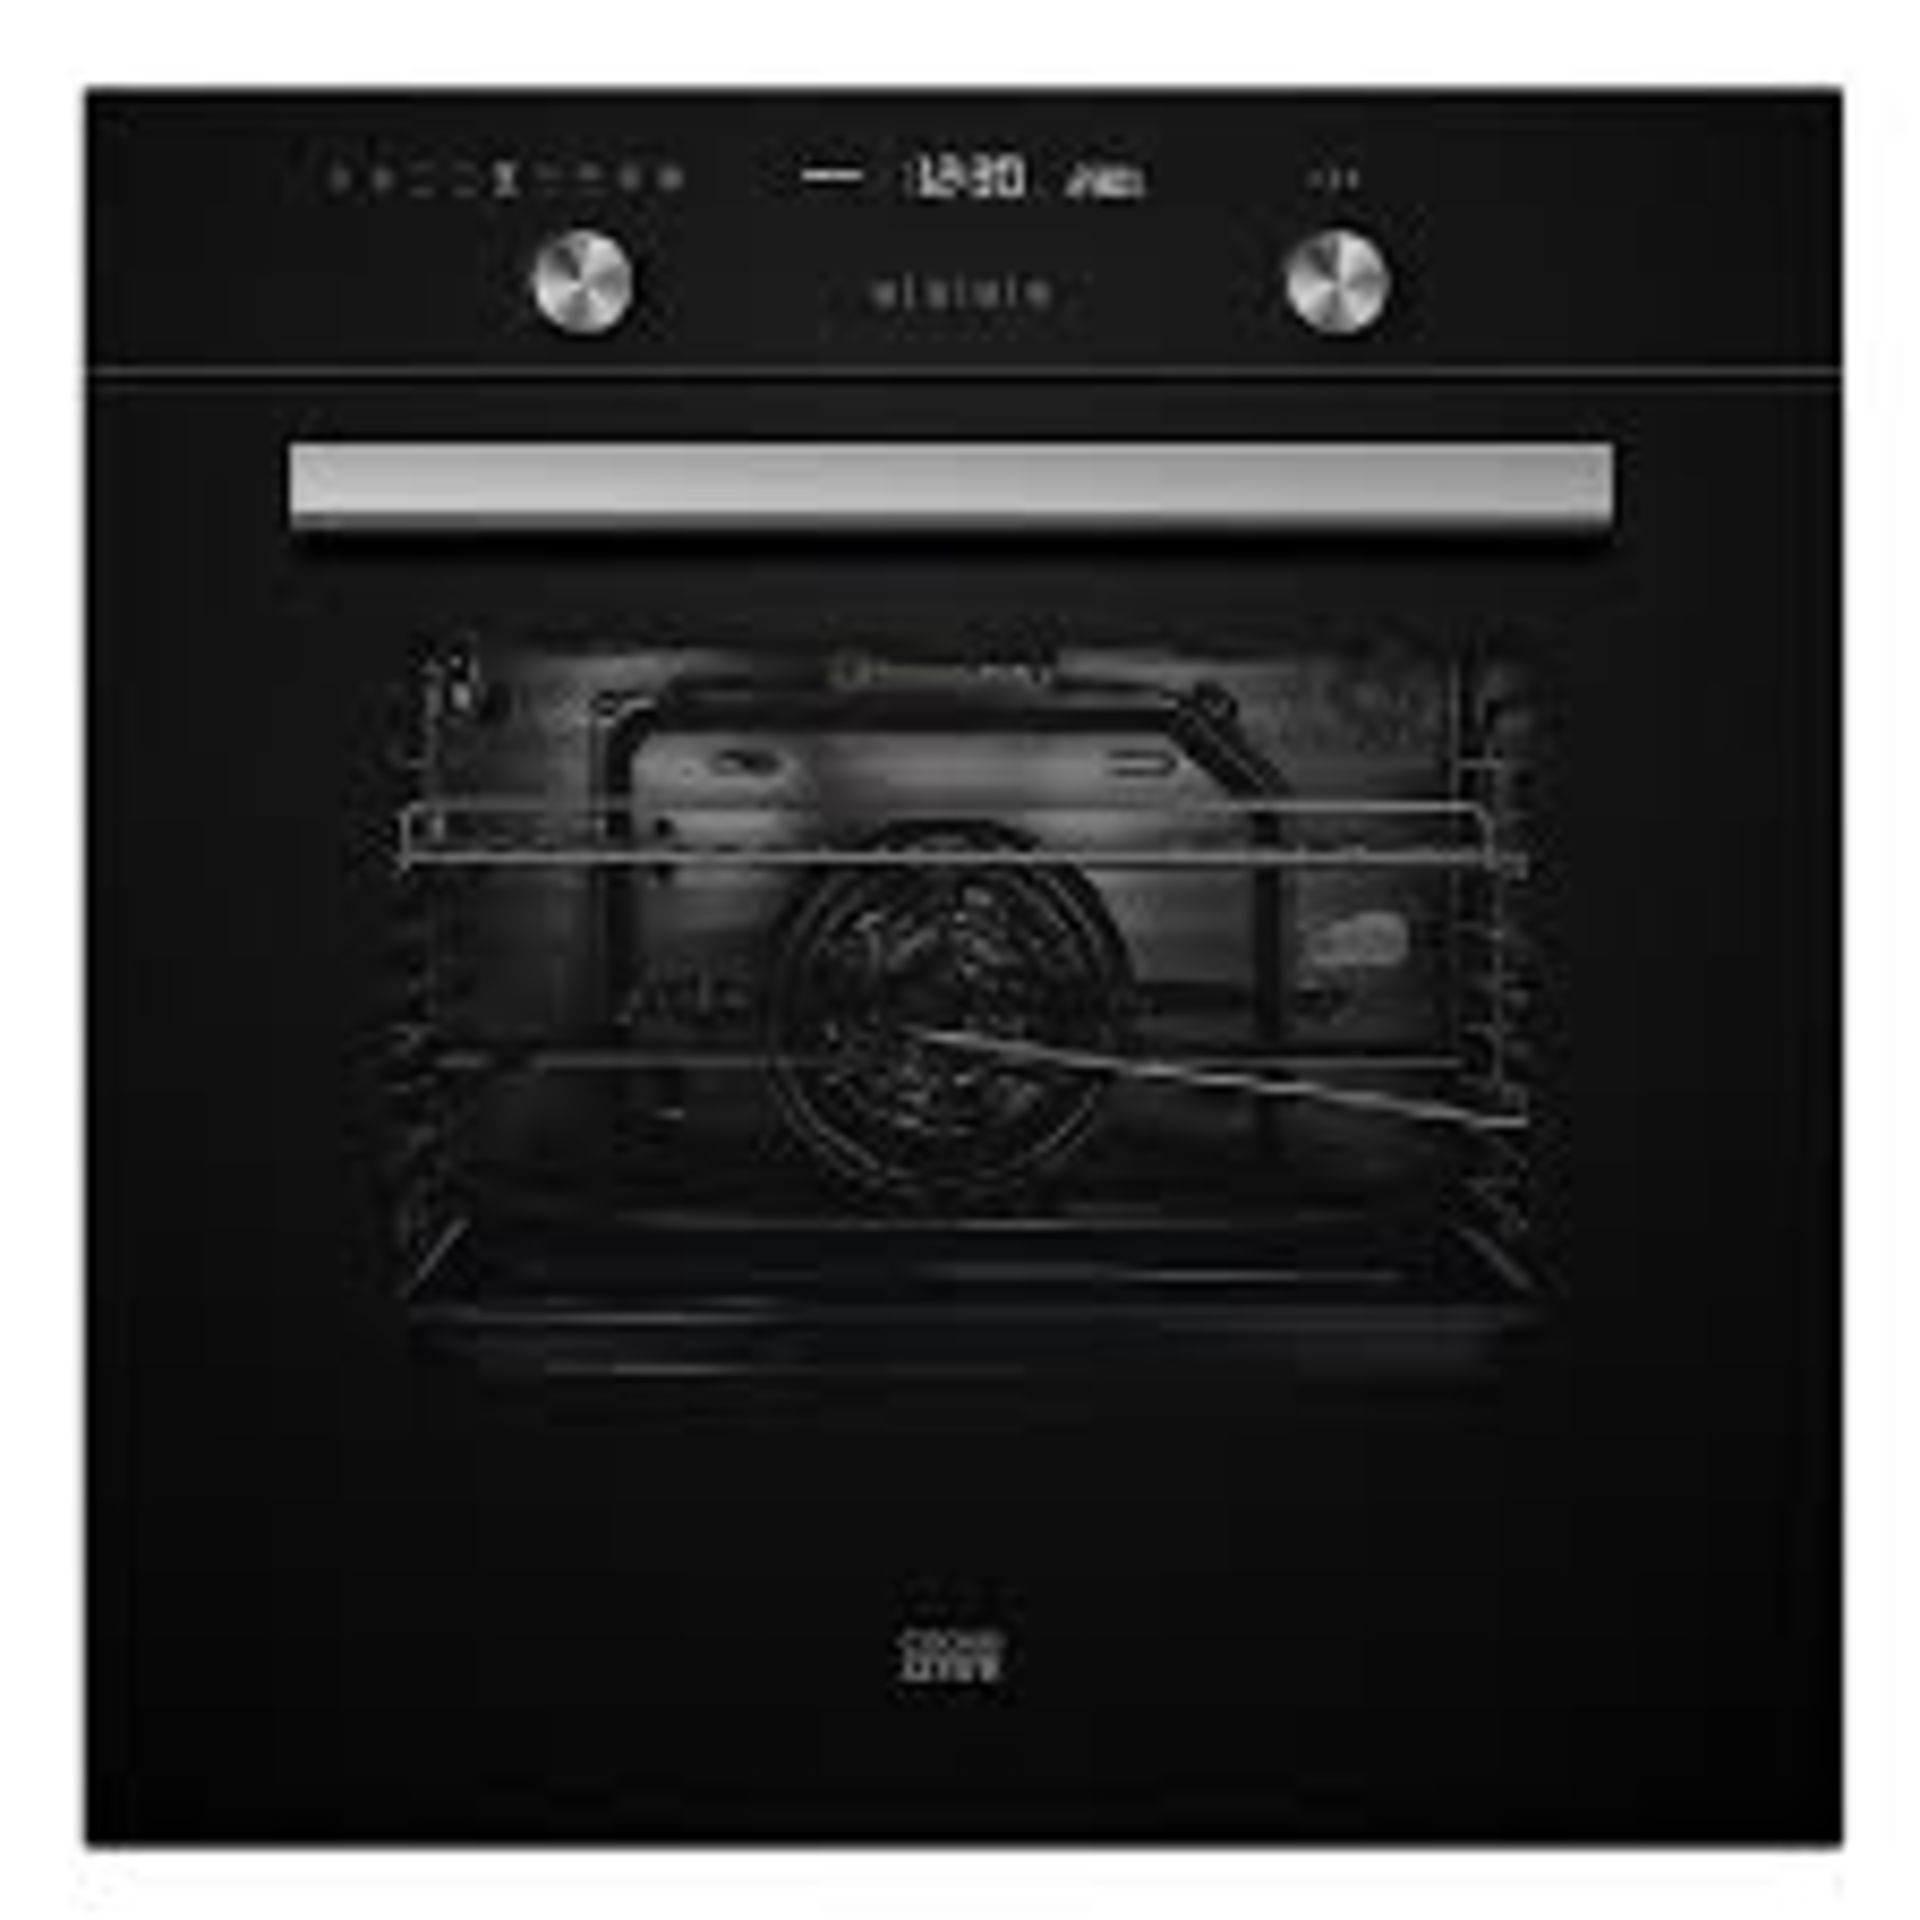 Cooke & Lewis CLMFBLa Built-in Single Multifunction Oven - Black. - R14. This multifunctional oven